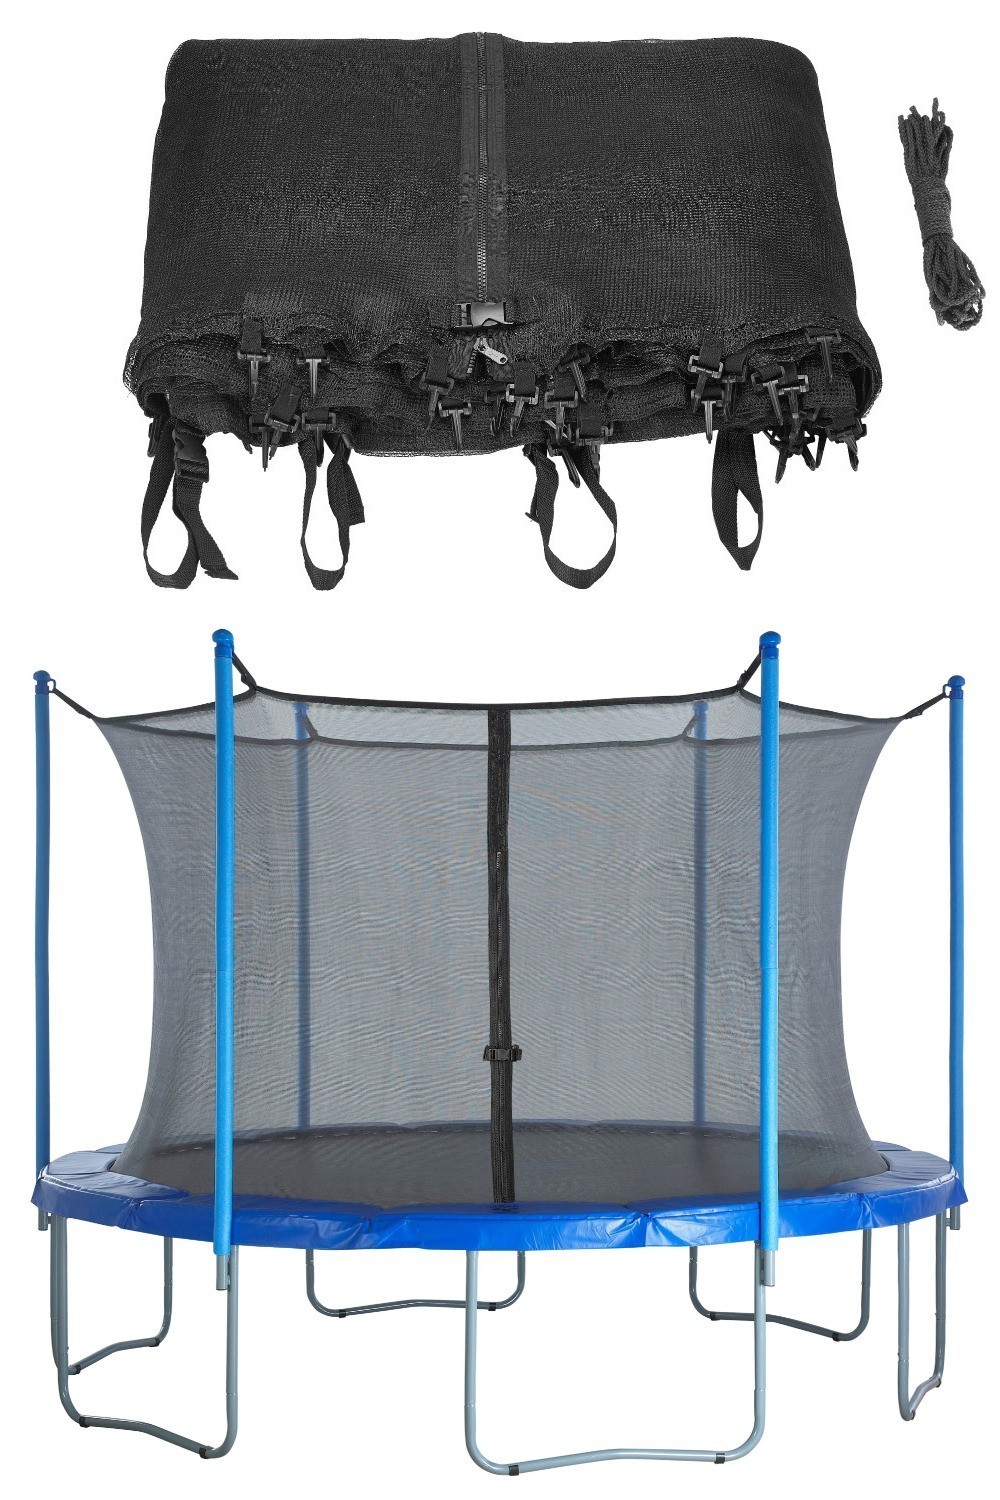 Trampoline Replacement Enclosure Safety Net, fits for 15 FT. Round Frames using 6 Poles or 3 Arches - Net Only